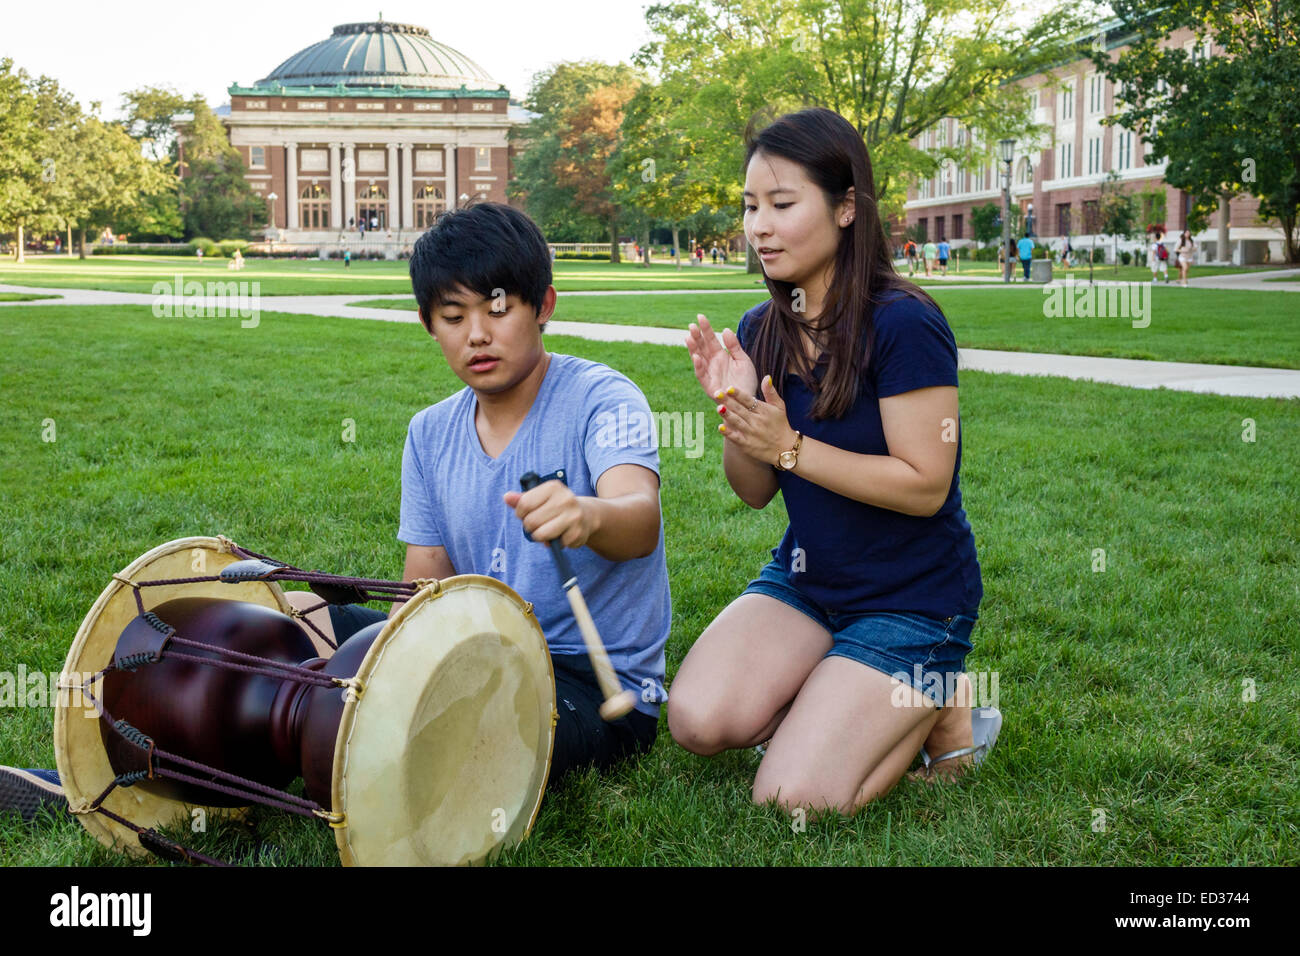 Illinois,Midwest,Urbana-Champaign,University of Illinois,Midwest,campus,Asian Asians ethnic immigrant immigrants minority,student students education p Stock Photo